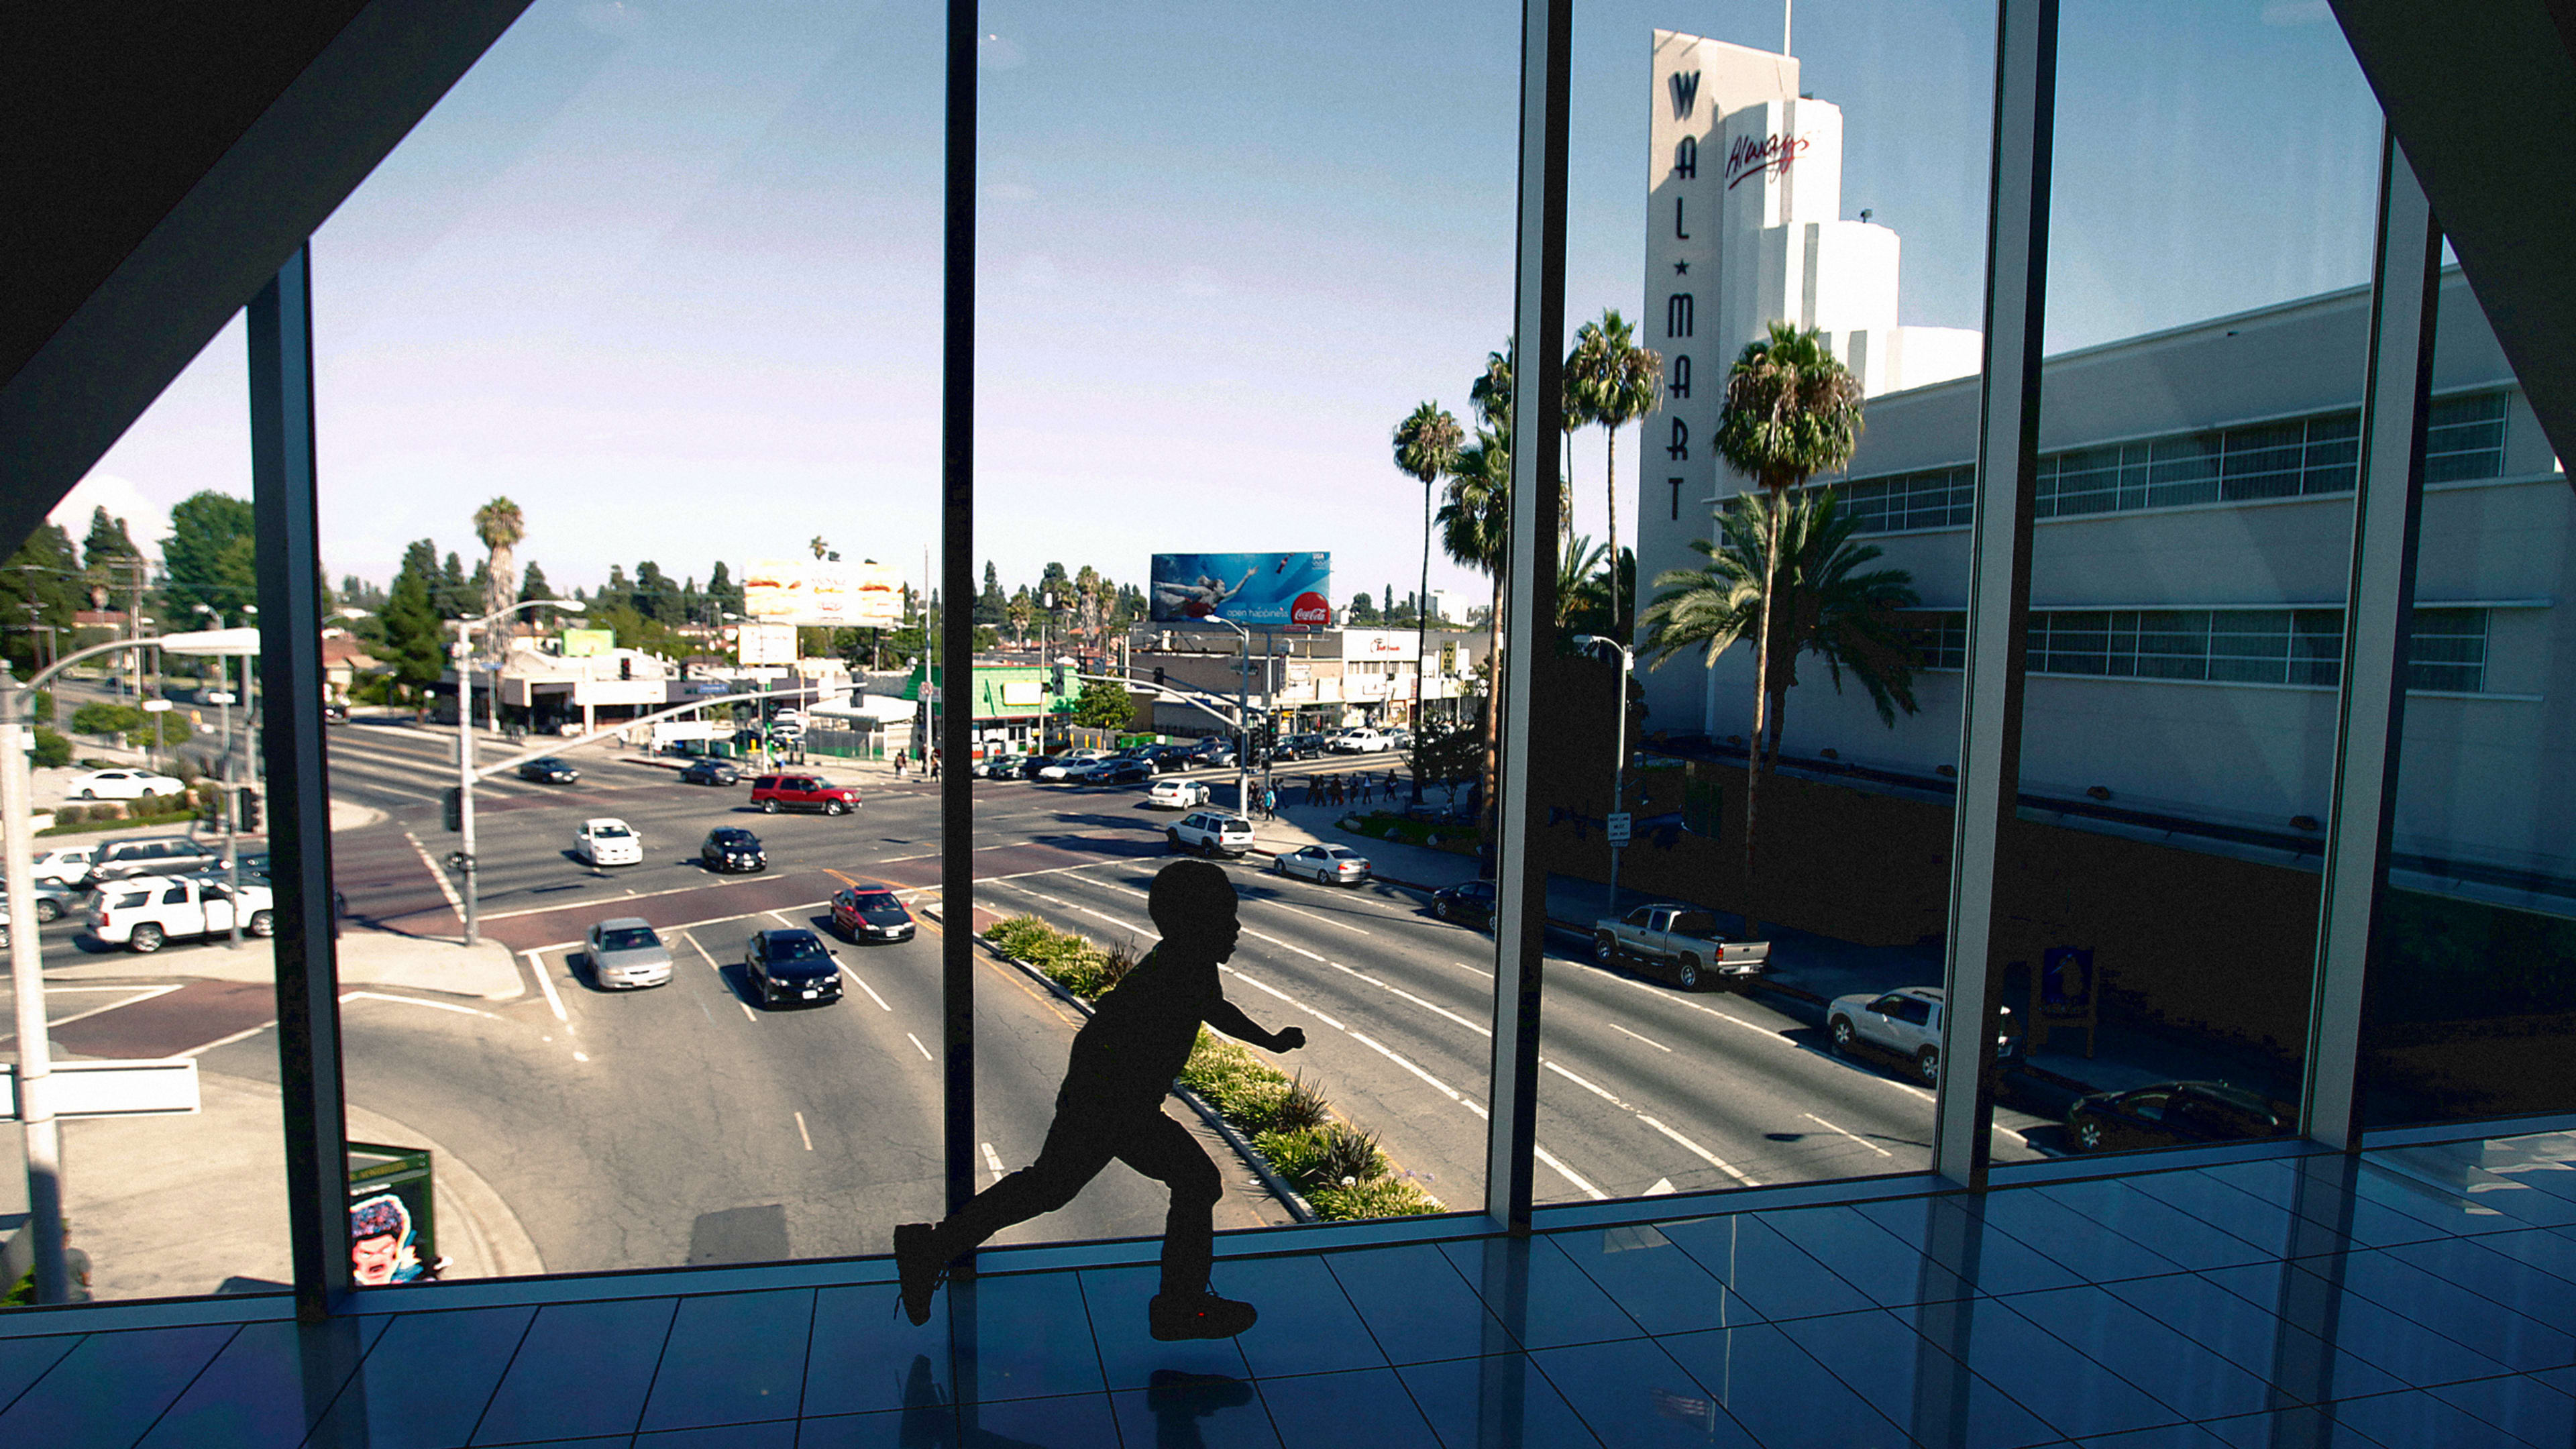 This L.A. mall could be reinvented as housing and worker-owned co-ops